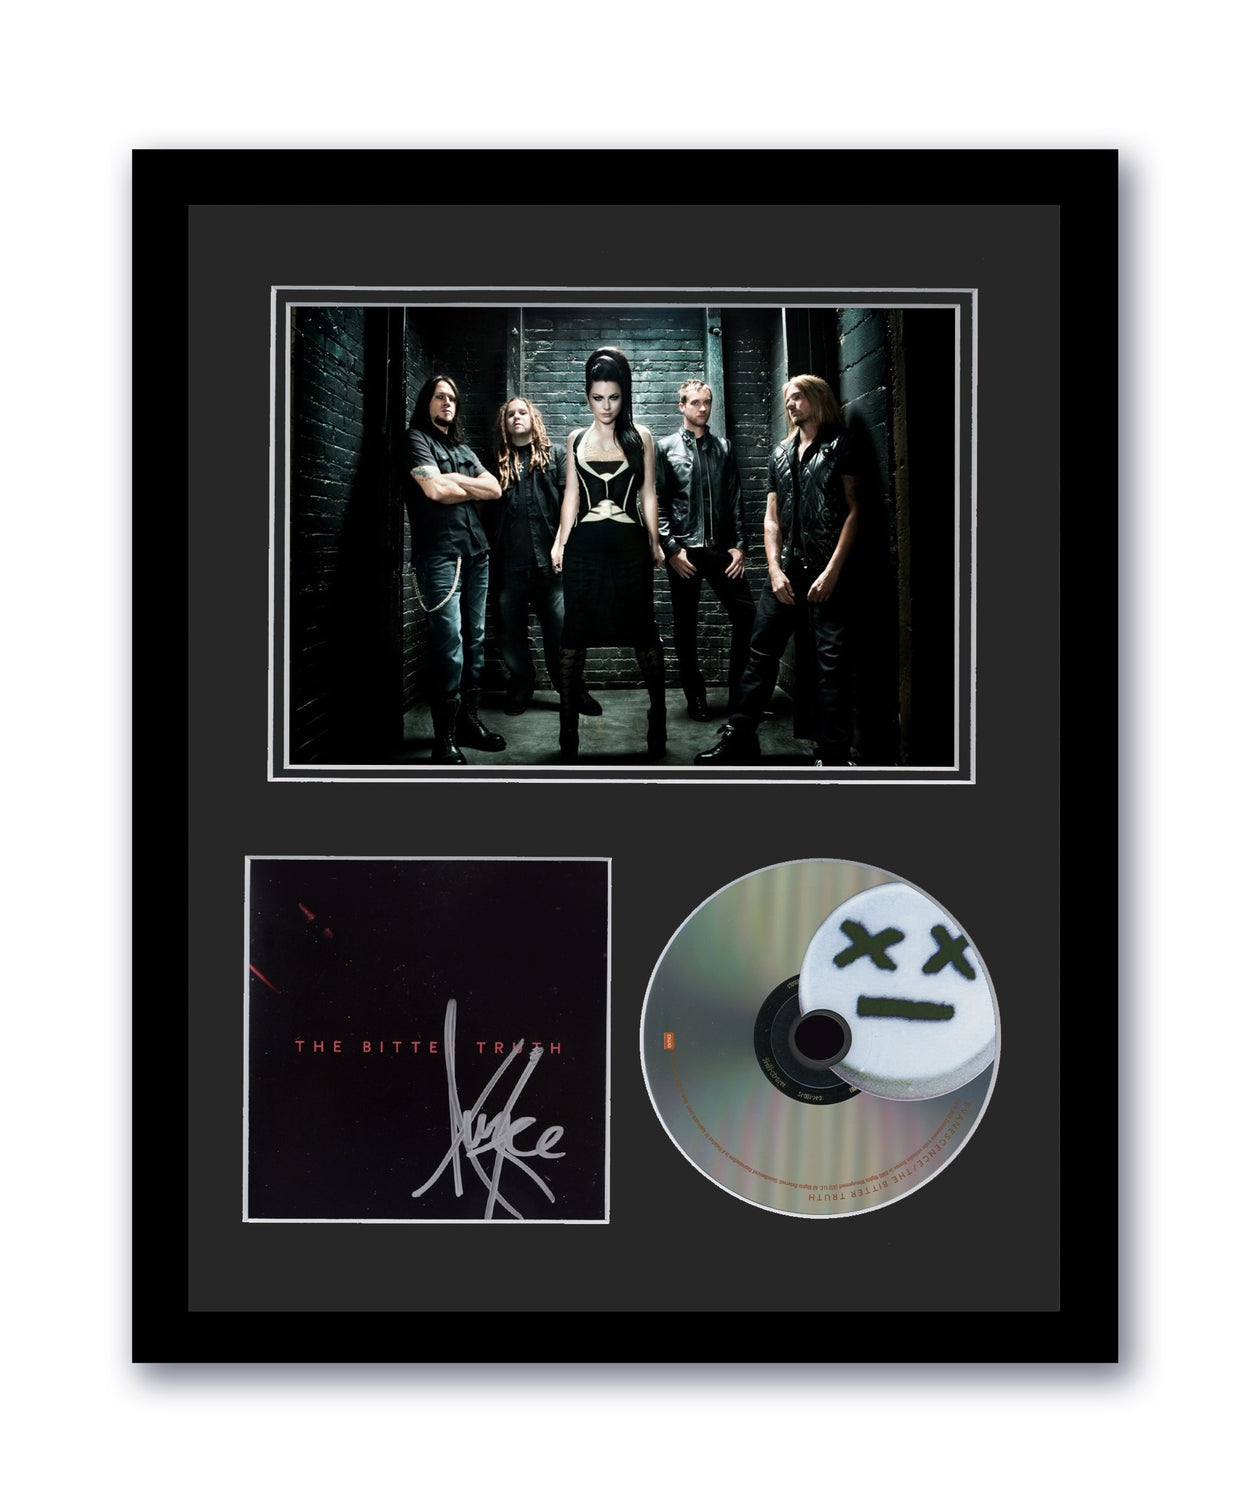 Evanescence Amy Lee Autographed 11x14 Custom Framed CD Photo Bitter Truth Signed ACOA 6